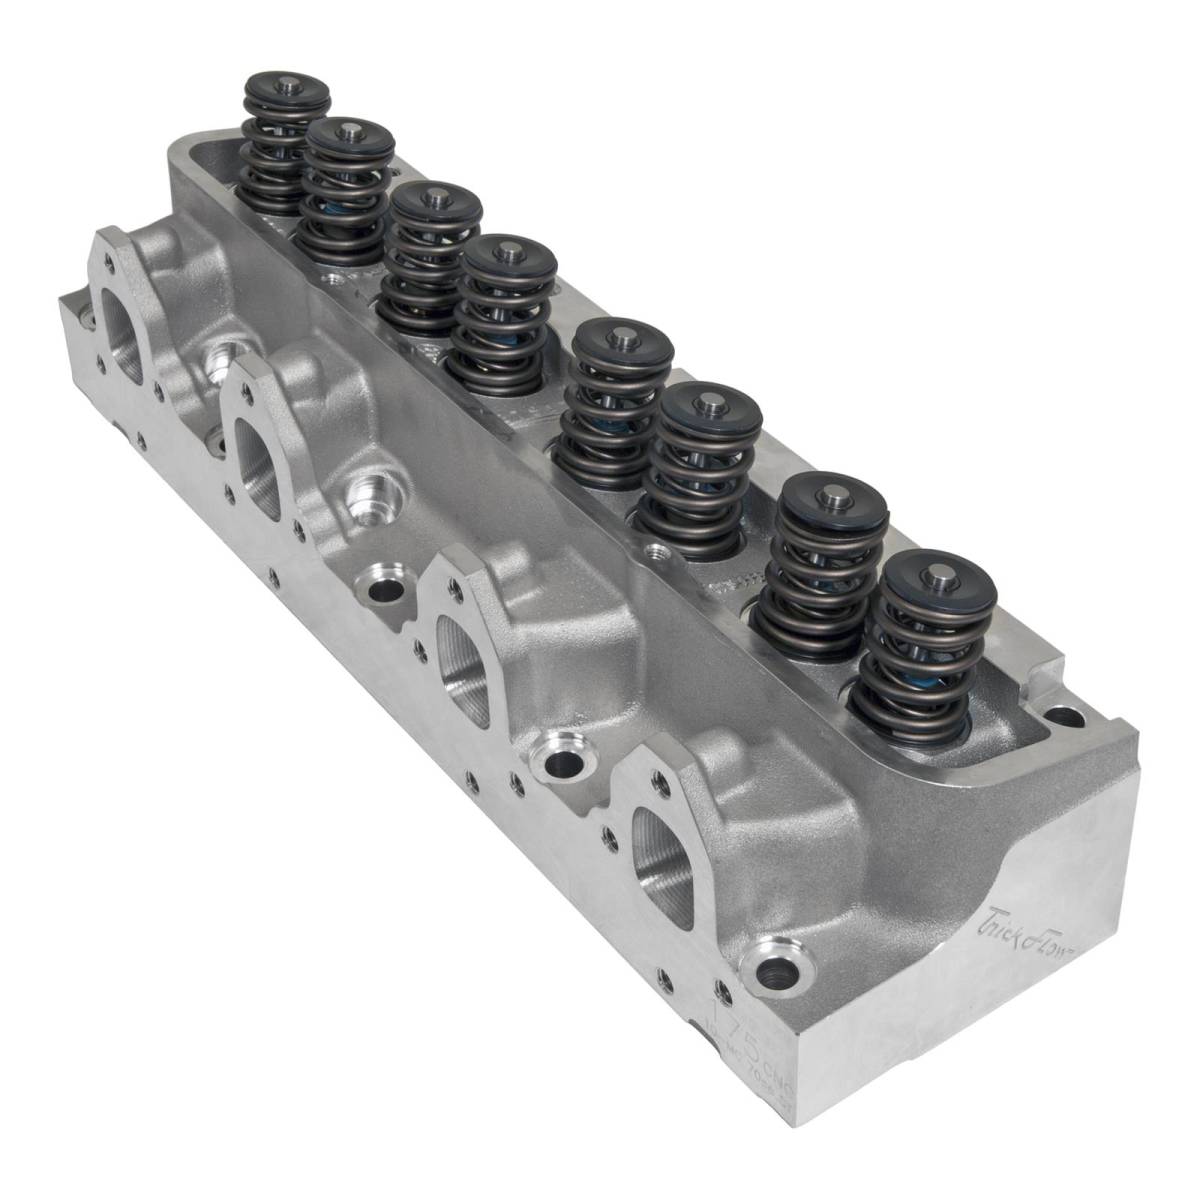 Trickflow - Trickflow CNC Ported PowerPort 175cc Intake Cylinder Head, Ford 360-390-428 FE, 70cc Chambers - Image 1